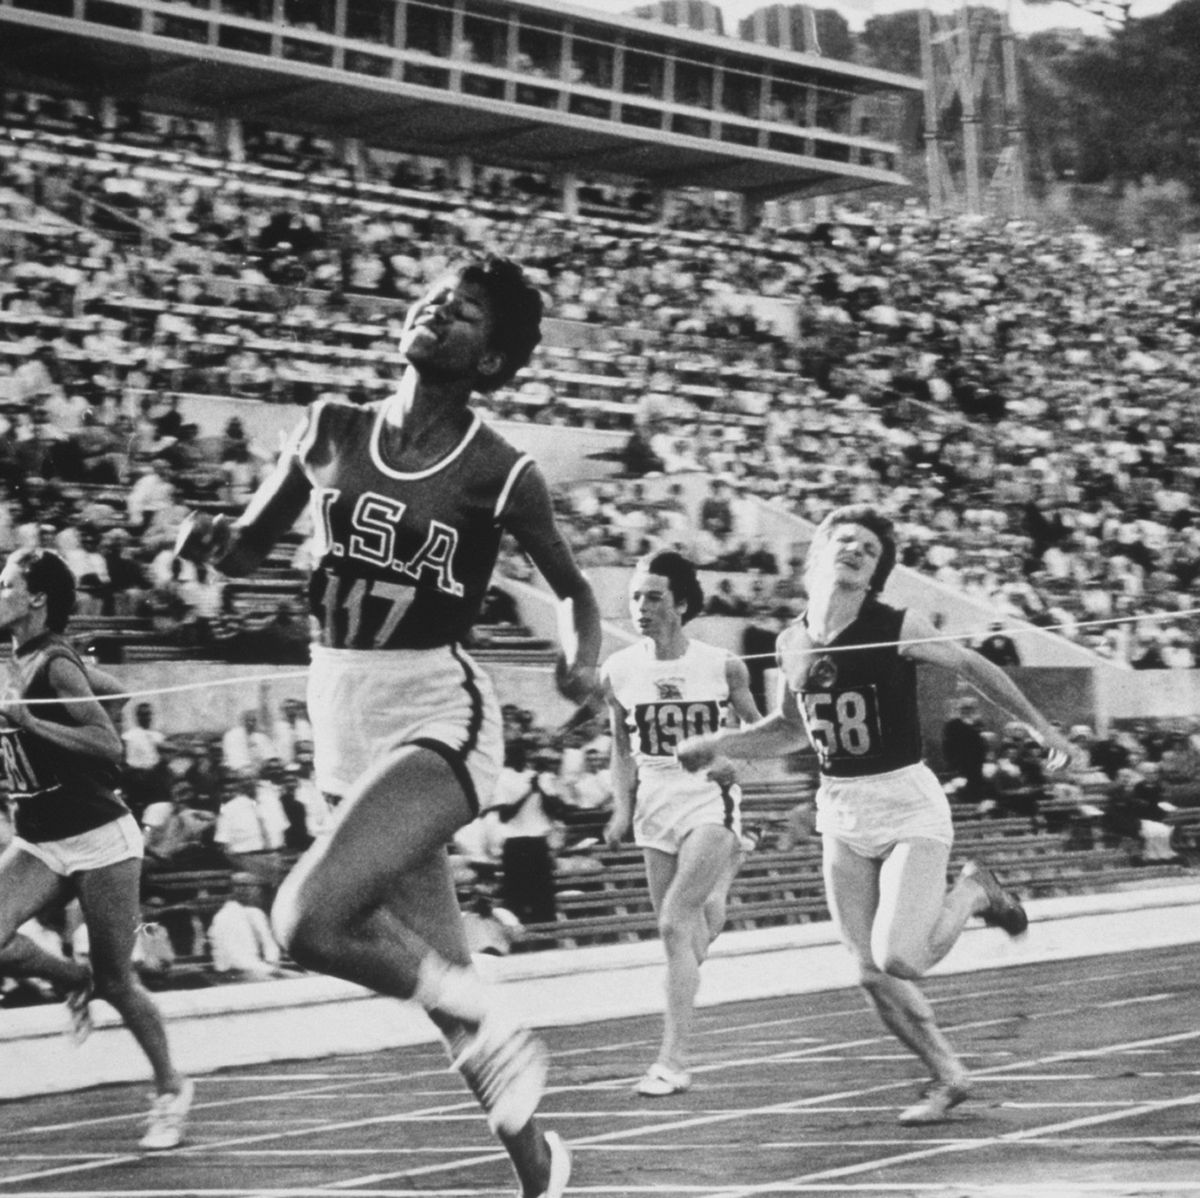 wilma rudolph of the usa